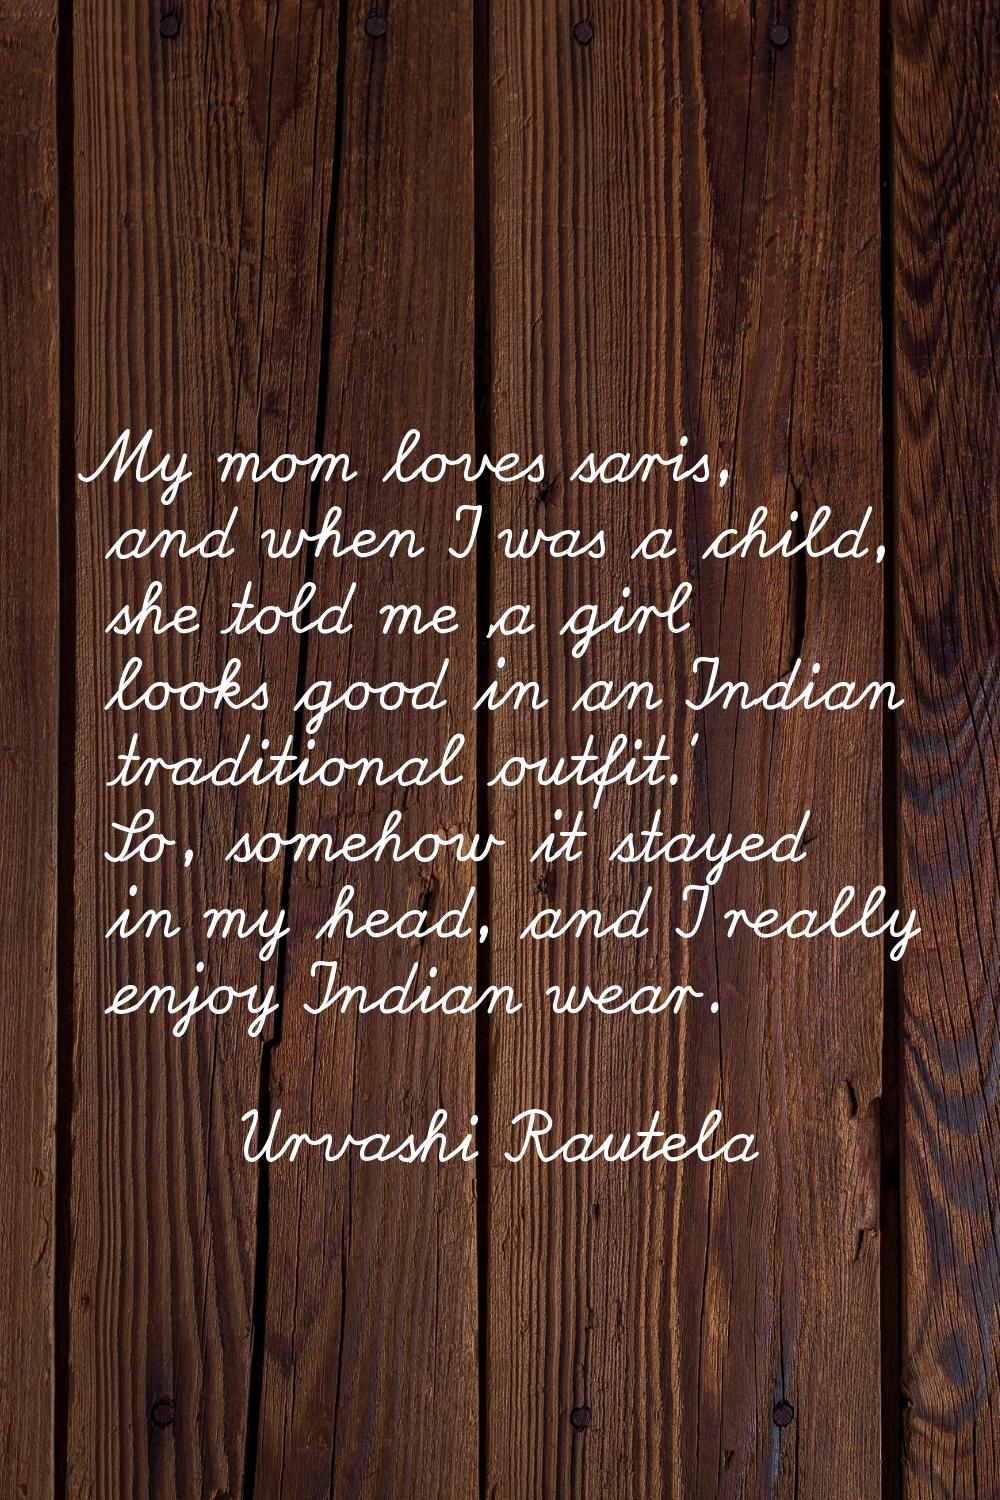 My mom loves saris, and when I was a child, she told me 'a girl looks good in an Indian traditional